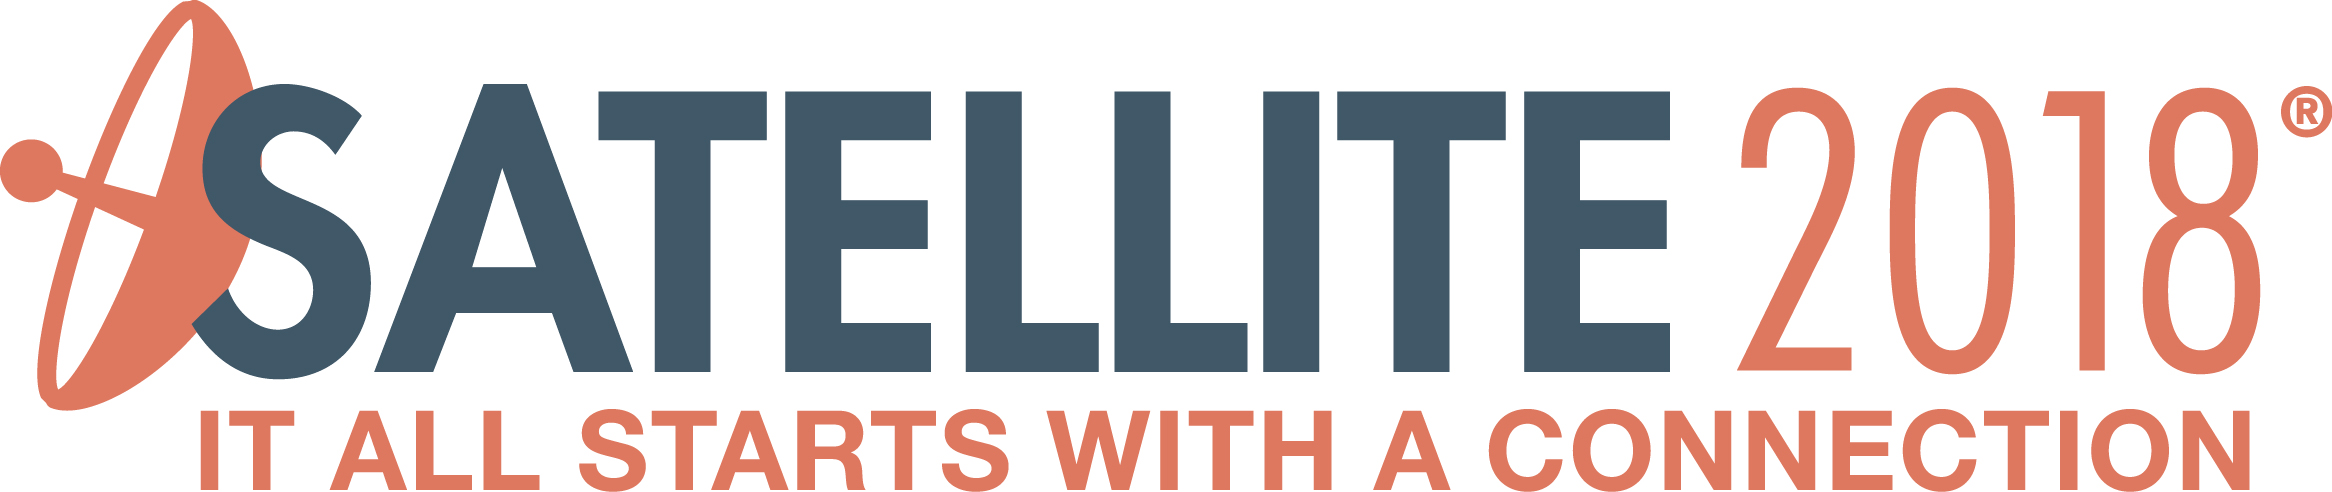 Amphinicy Is Exhibiting at Satellite 2018!